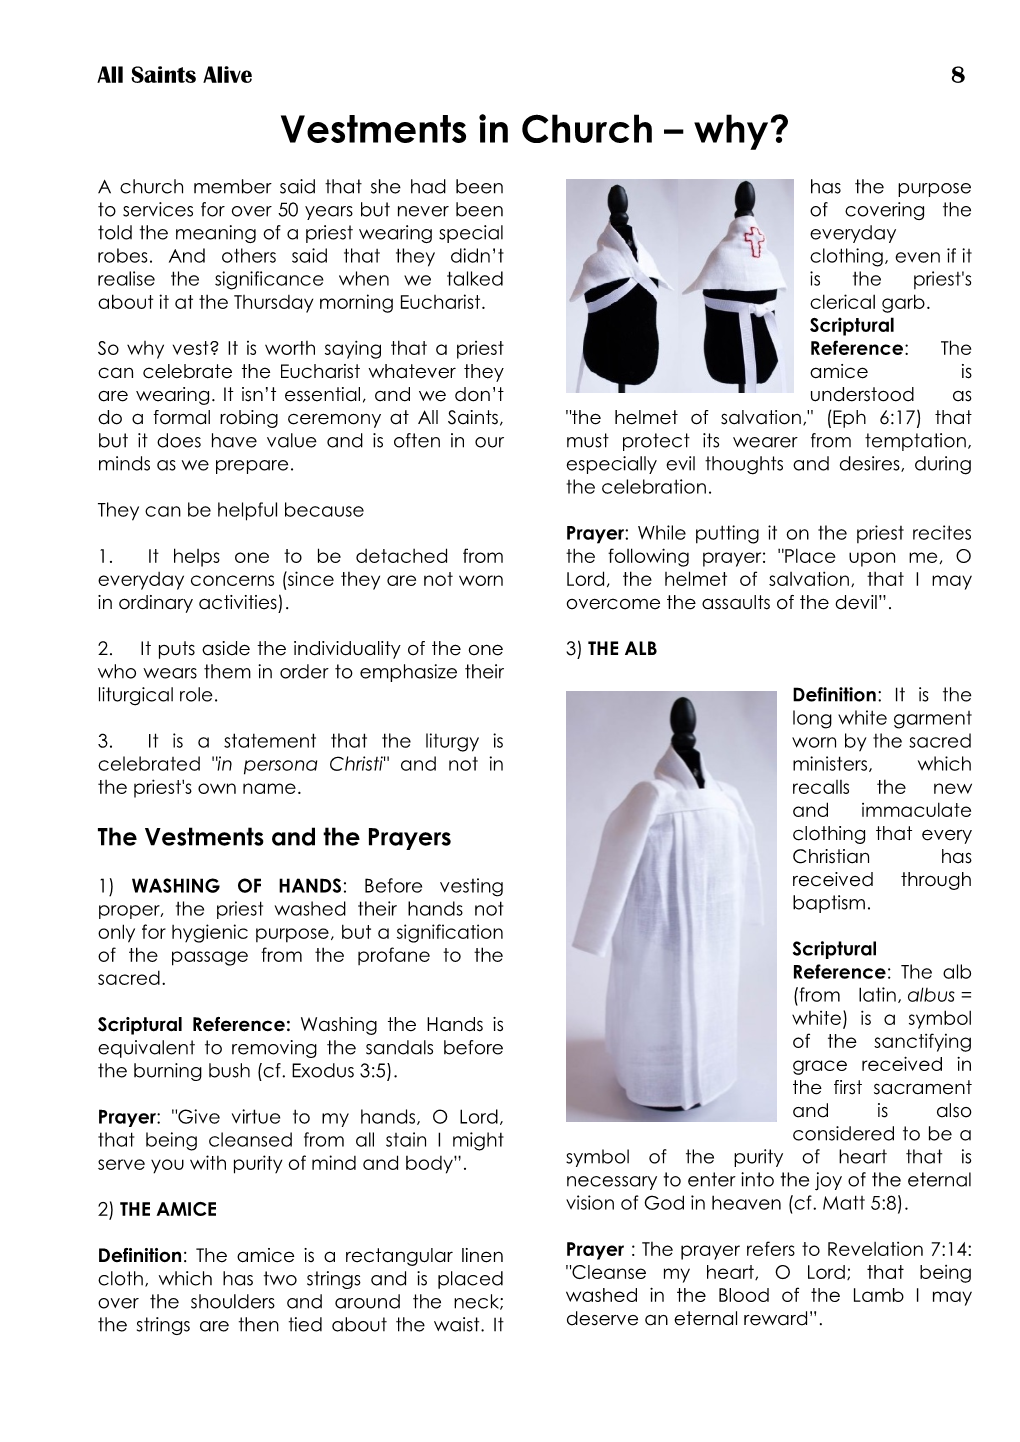 Vestments in Church – Why?